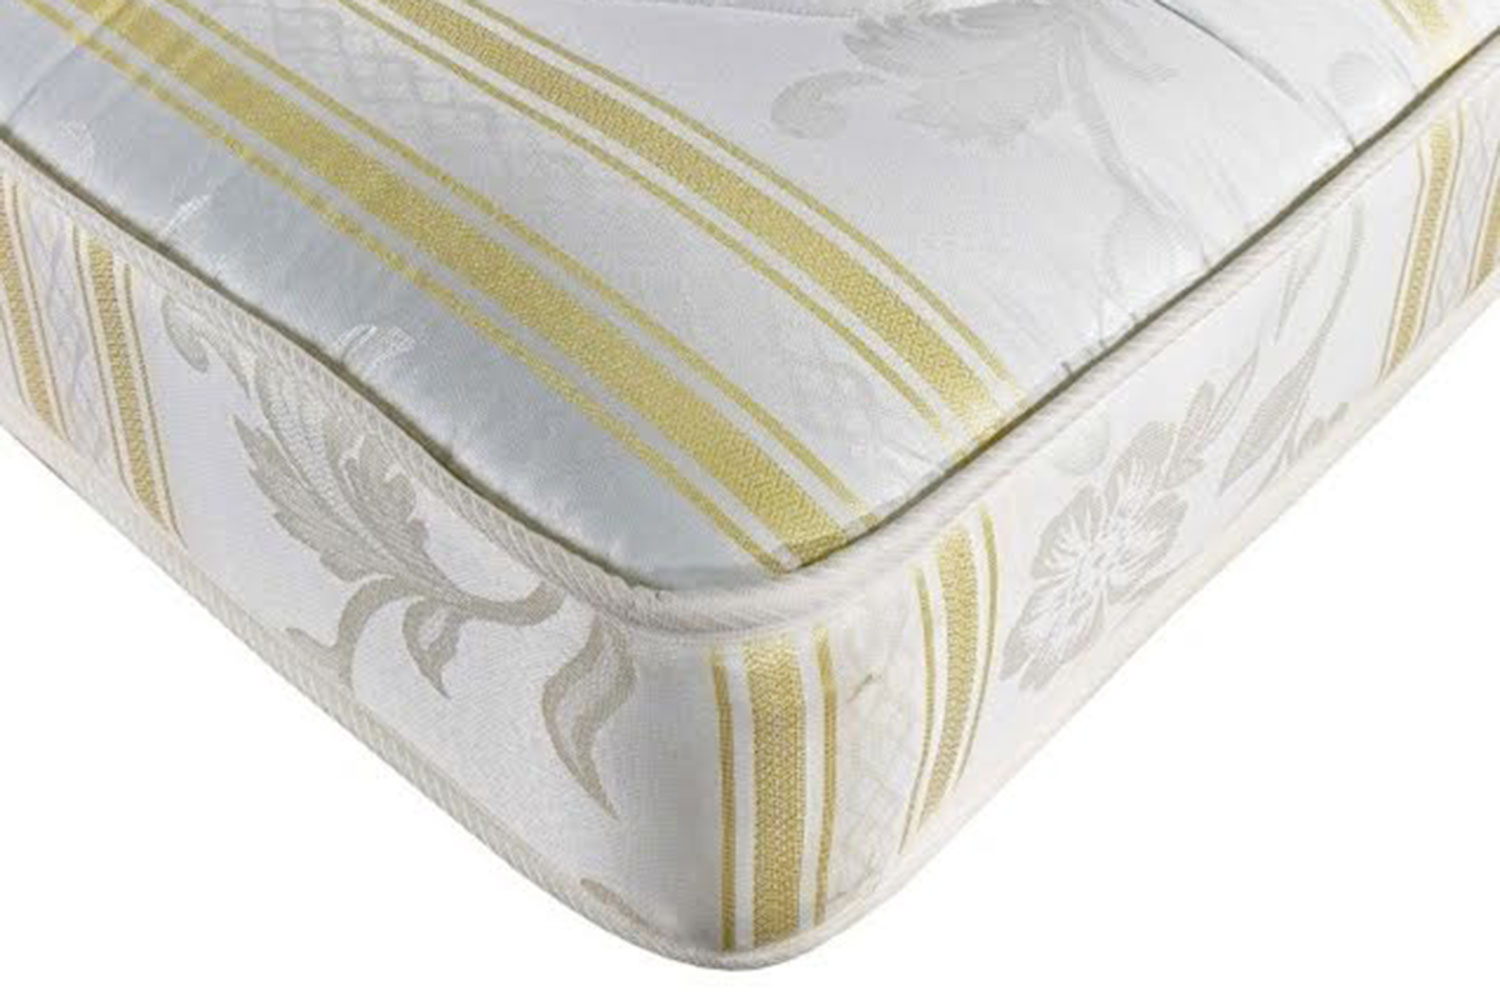 Joseph Luxury Quilted Mattress-King Size